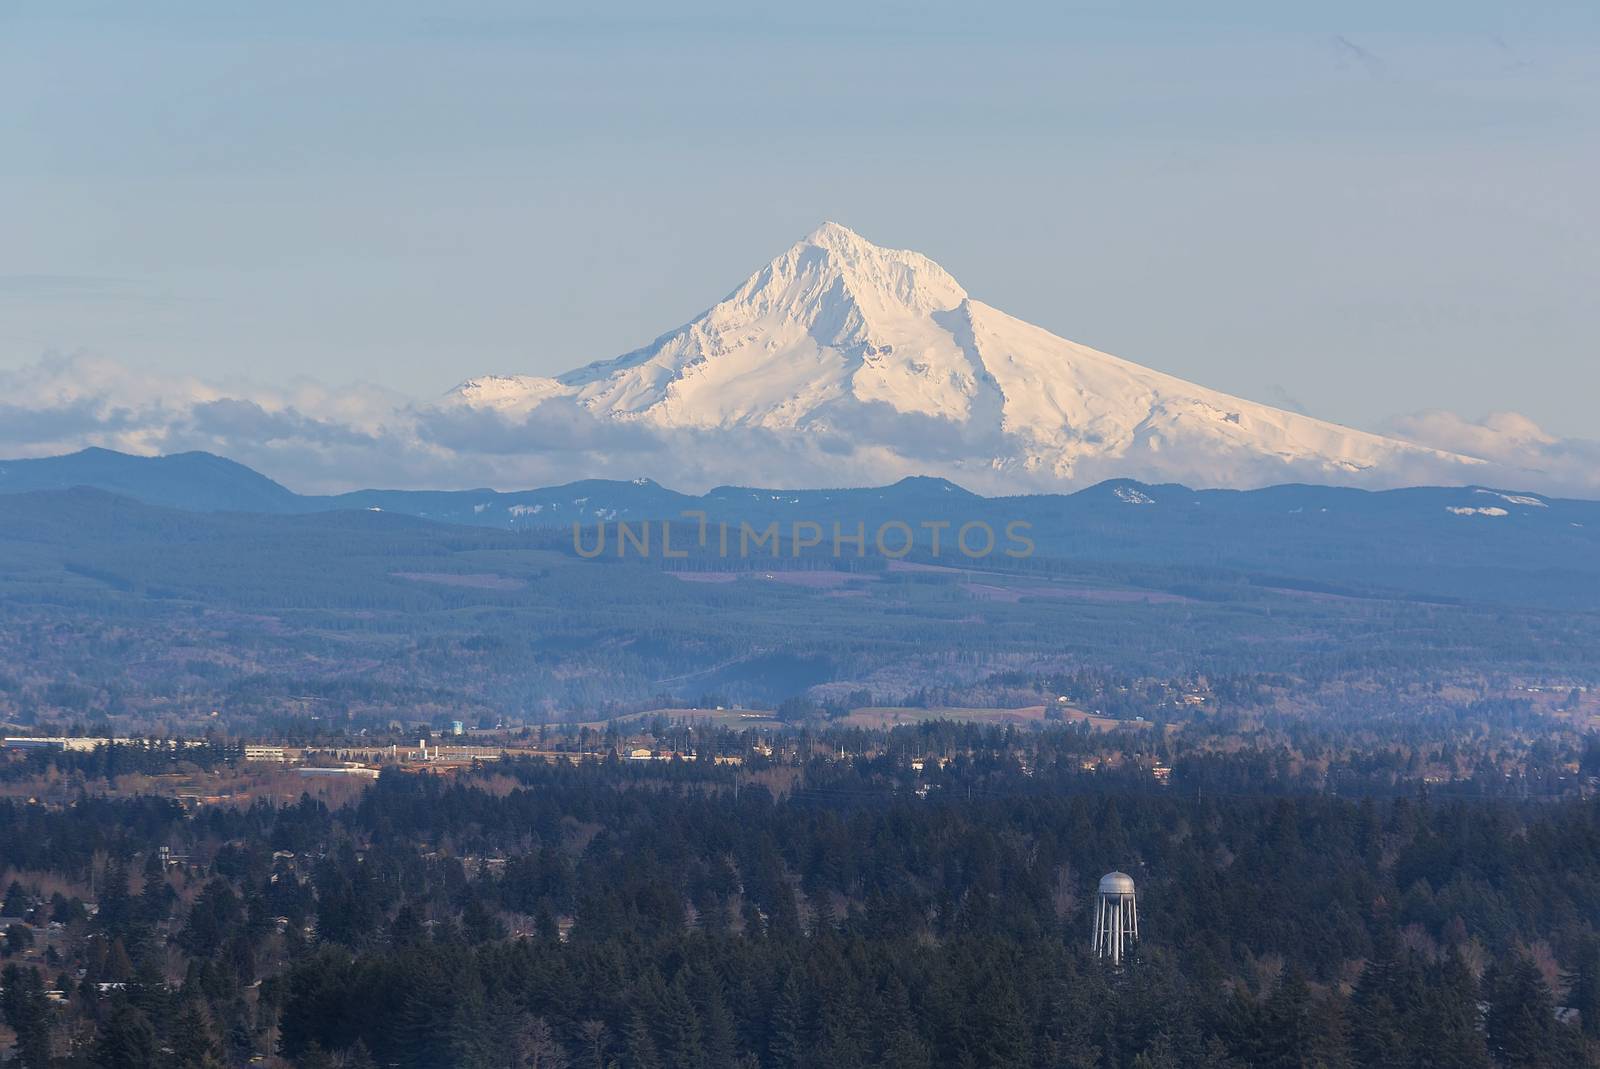 Snow covered Mount Hood view with water tower in the landscape on a sunny day